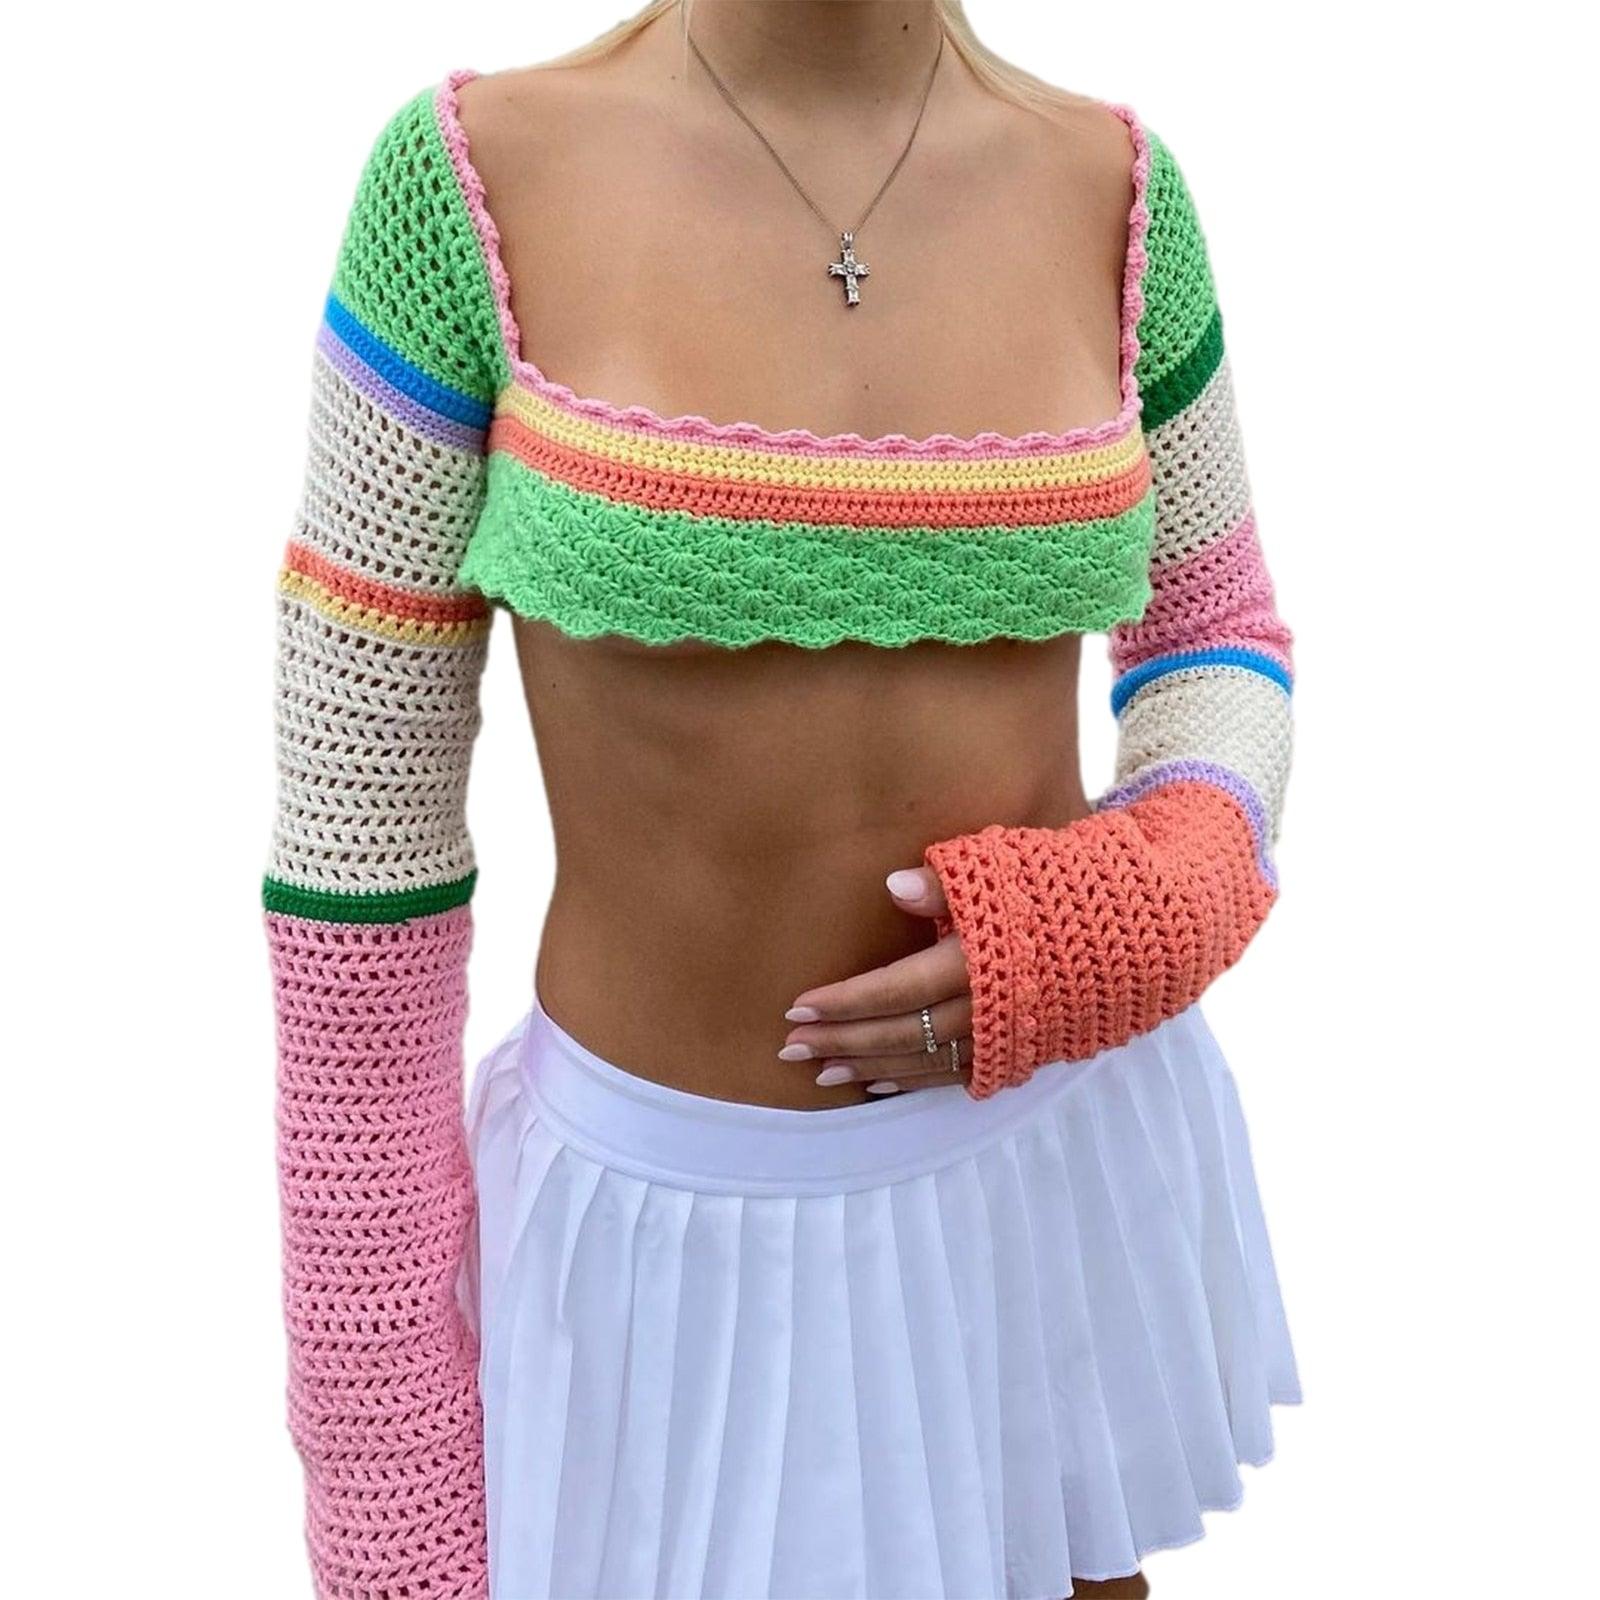 Knitted Crochet Sweater Crop Top Tops - The Burner Shop